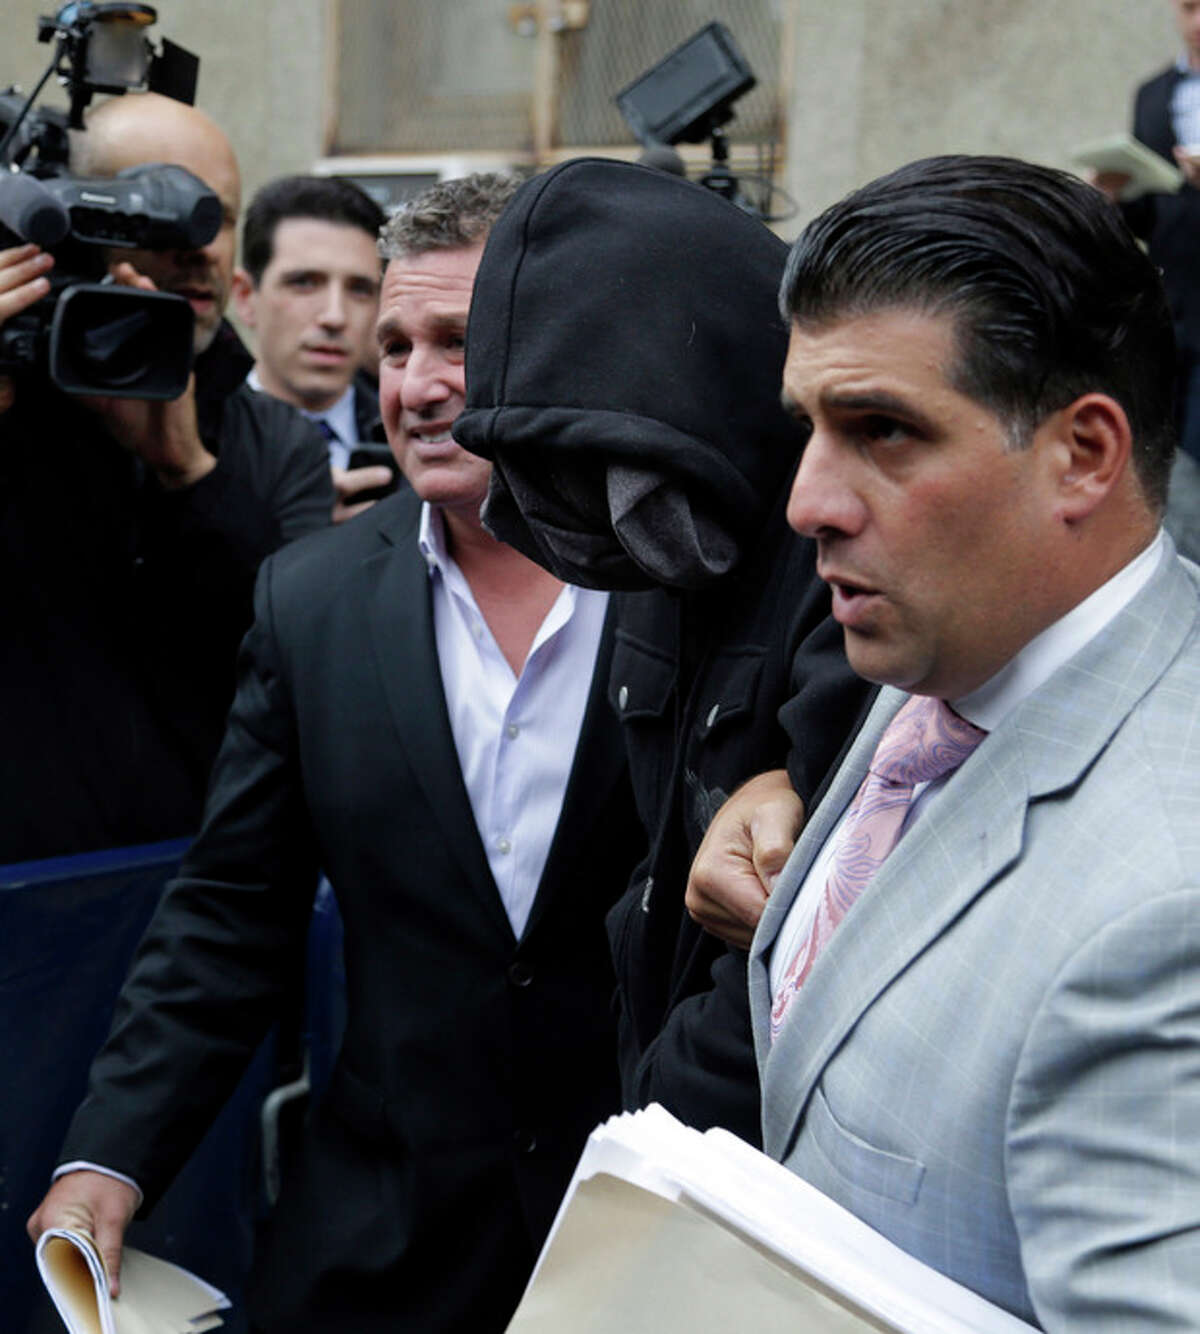 Wojciech Braszczok, center, with face covered, leaves the courthouse in New York, Wednesday, Oct. 9, 2013. Braszczok, an undercover police detective, was charged with gang assault in a motorcycle rally that descended into violence in New York. (AP Photo/Seth Wenig)